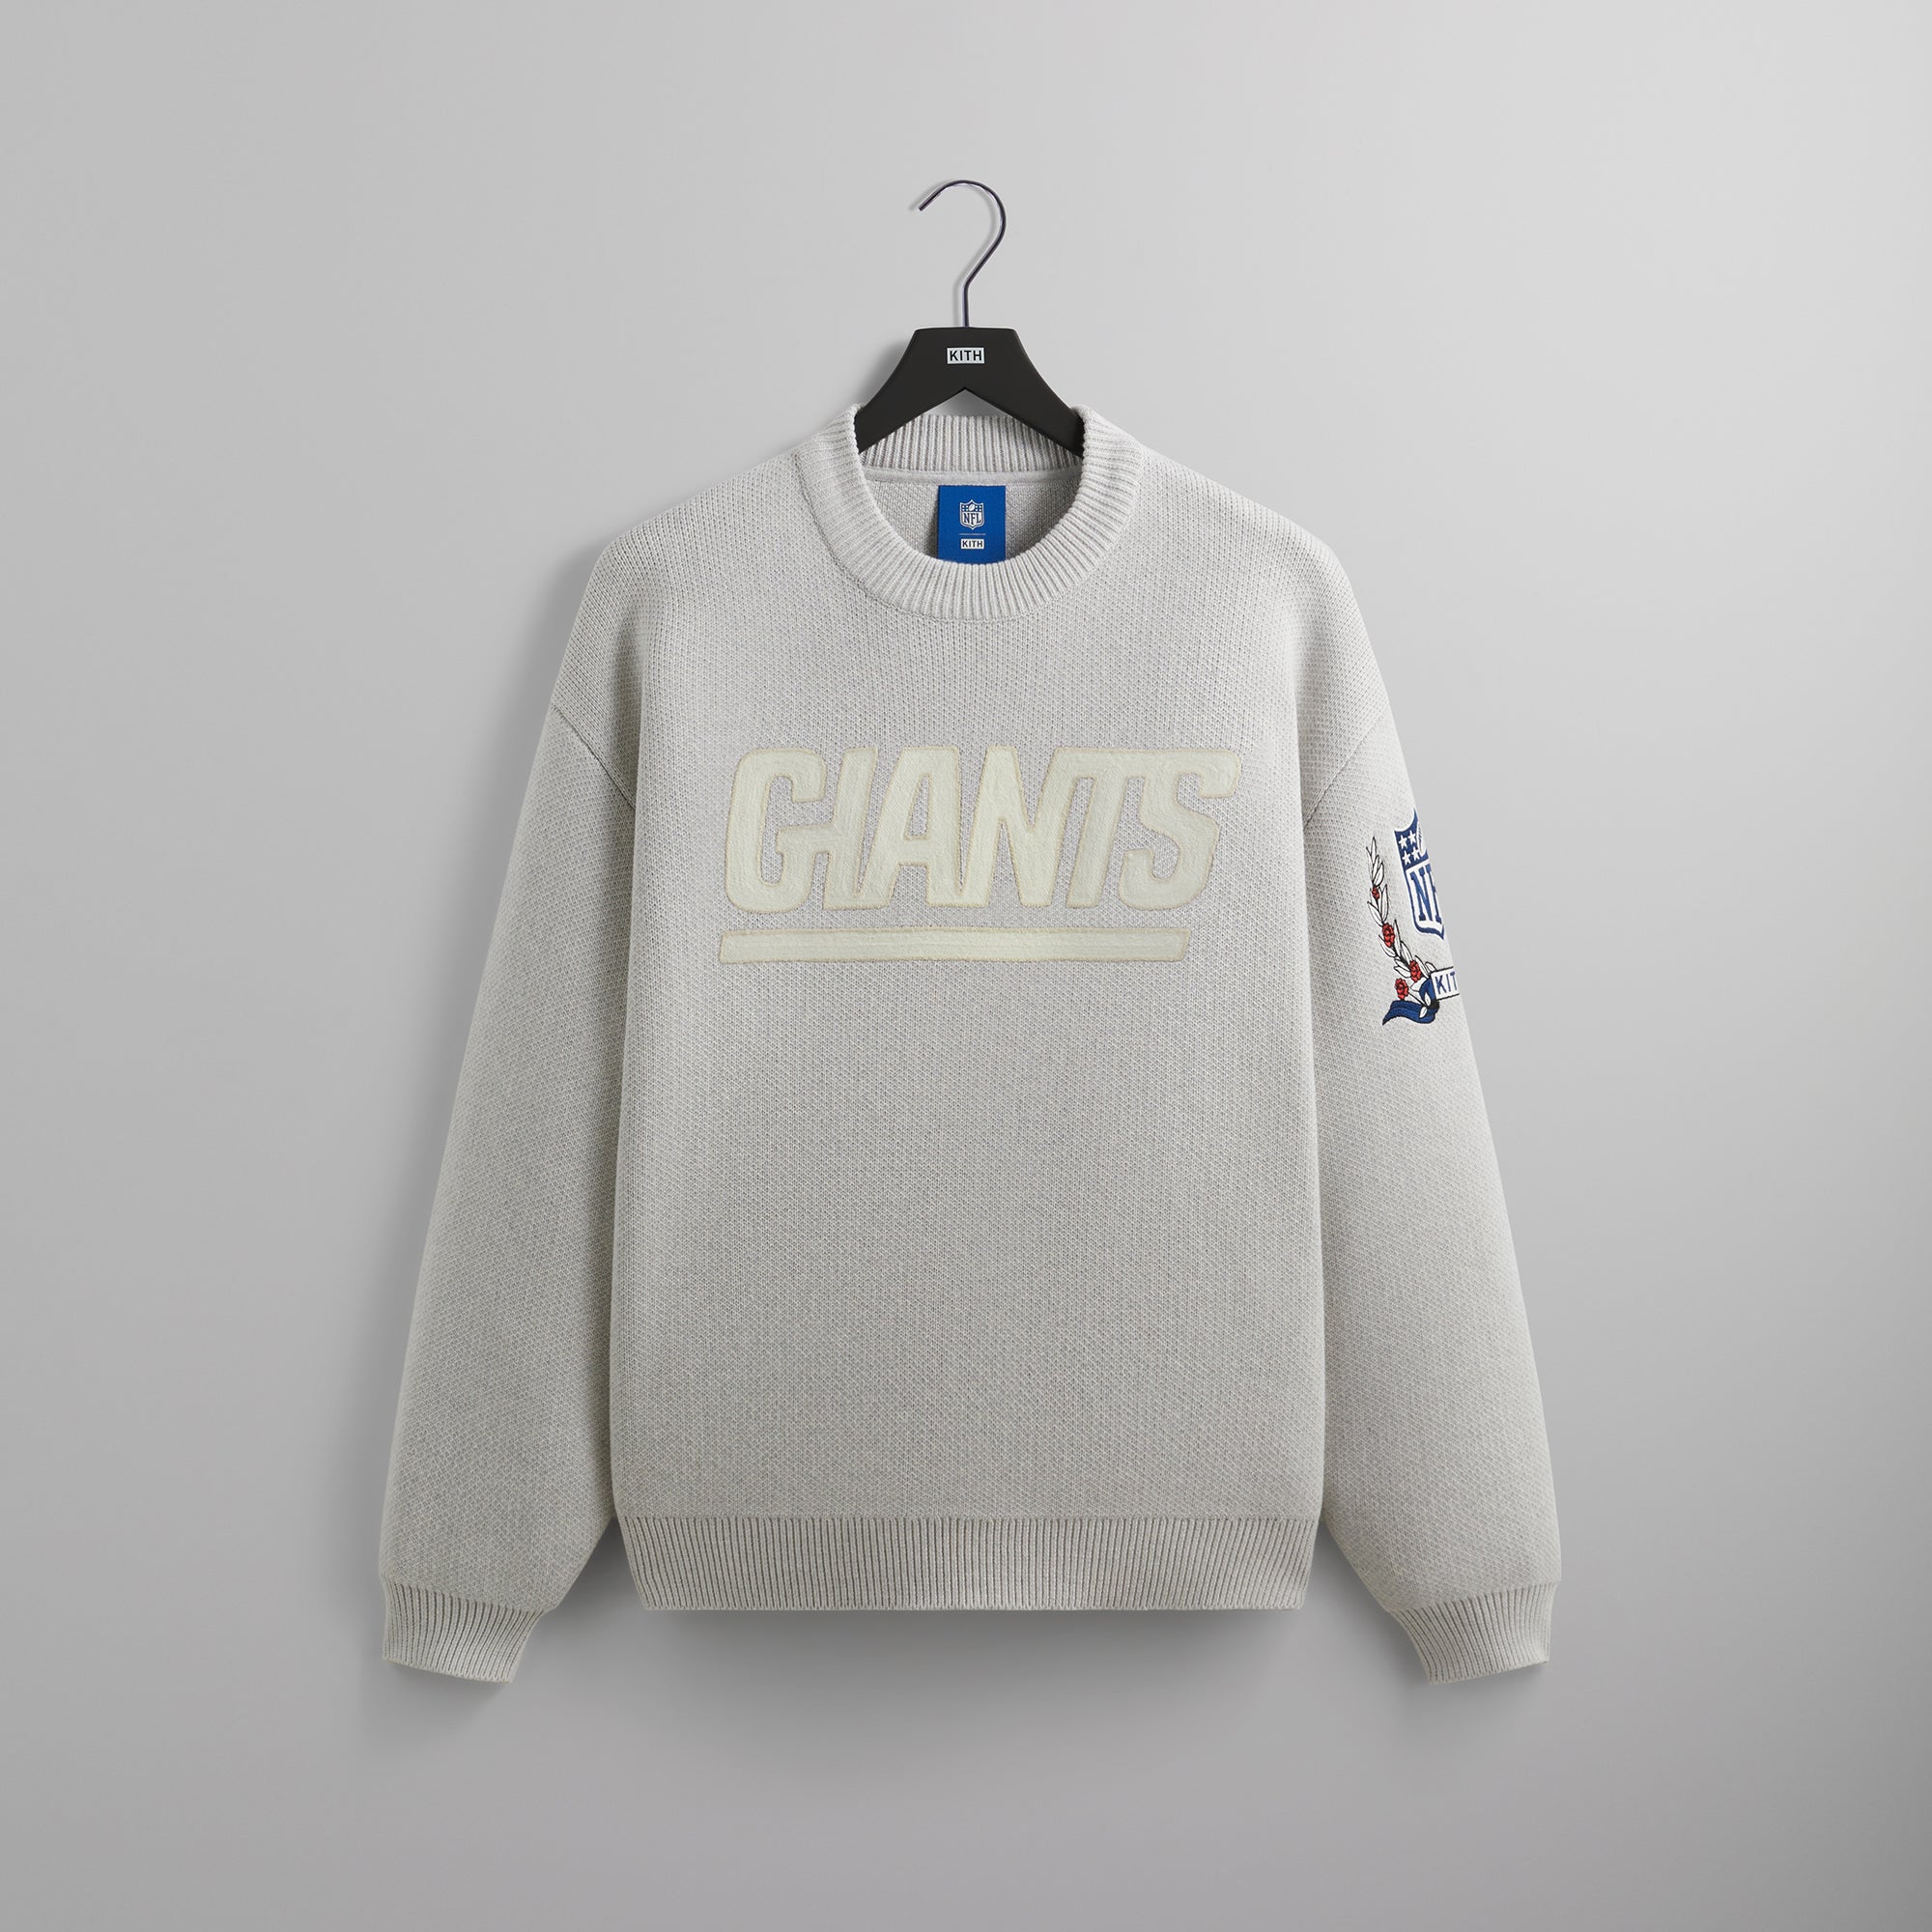 Kith for the NFL: Giants Chunky Cotton Sweater - Light Heather Grey